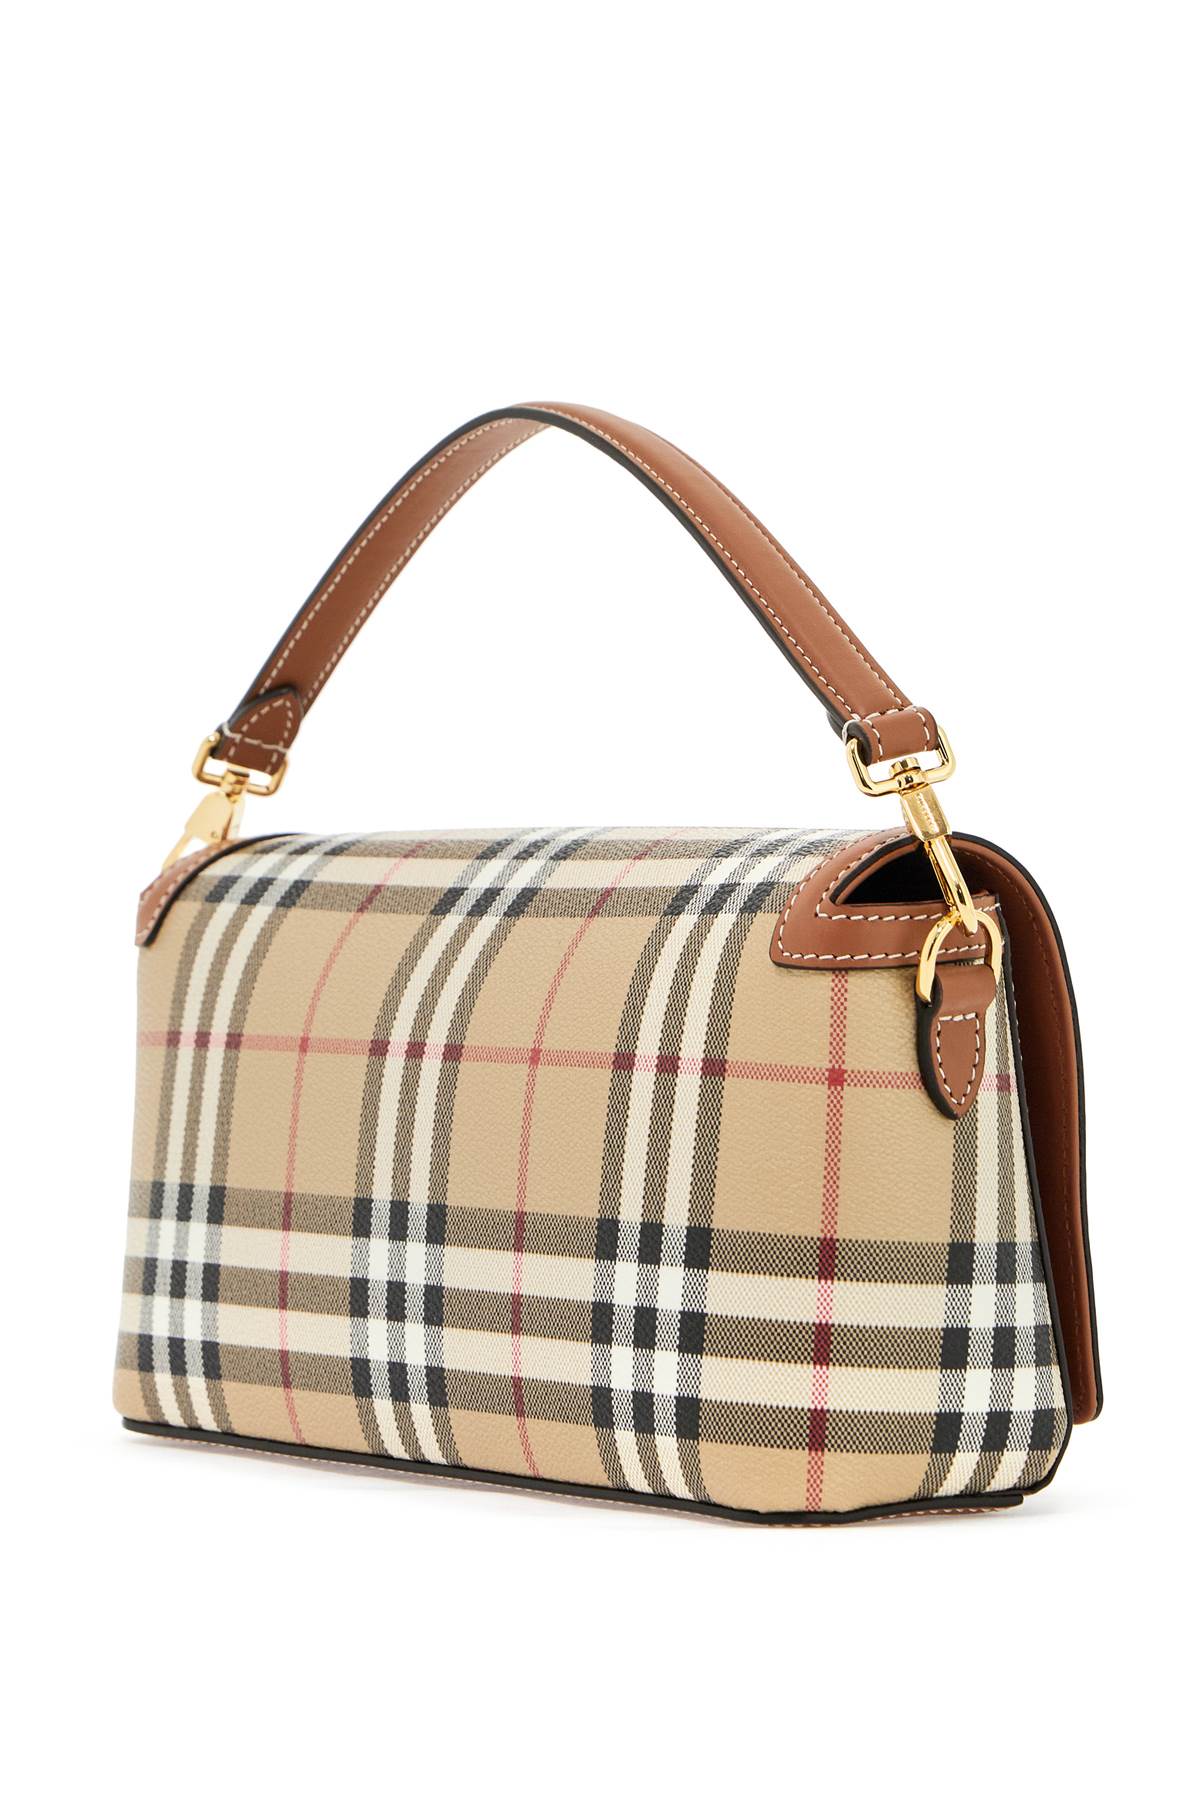 BURBERRY SHOULDER Handbag WITH CHECK PATTERN NOTES